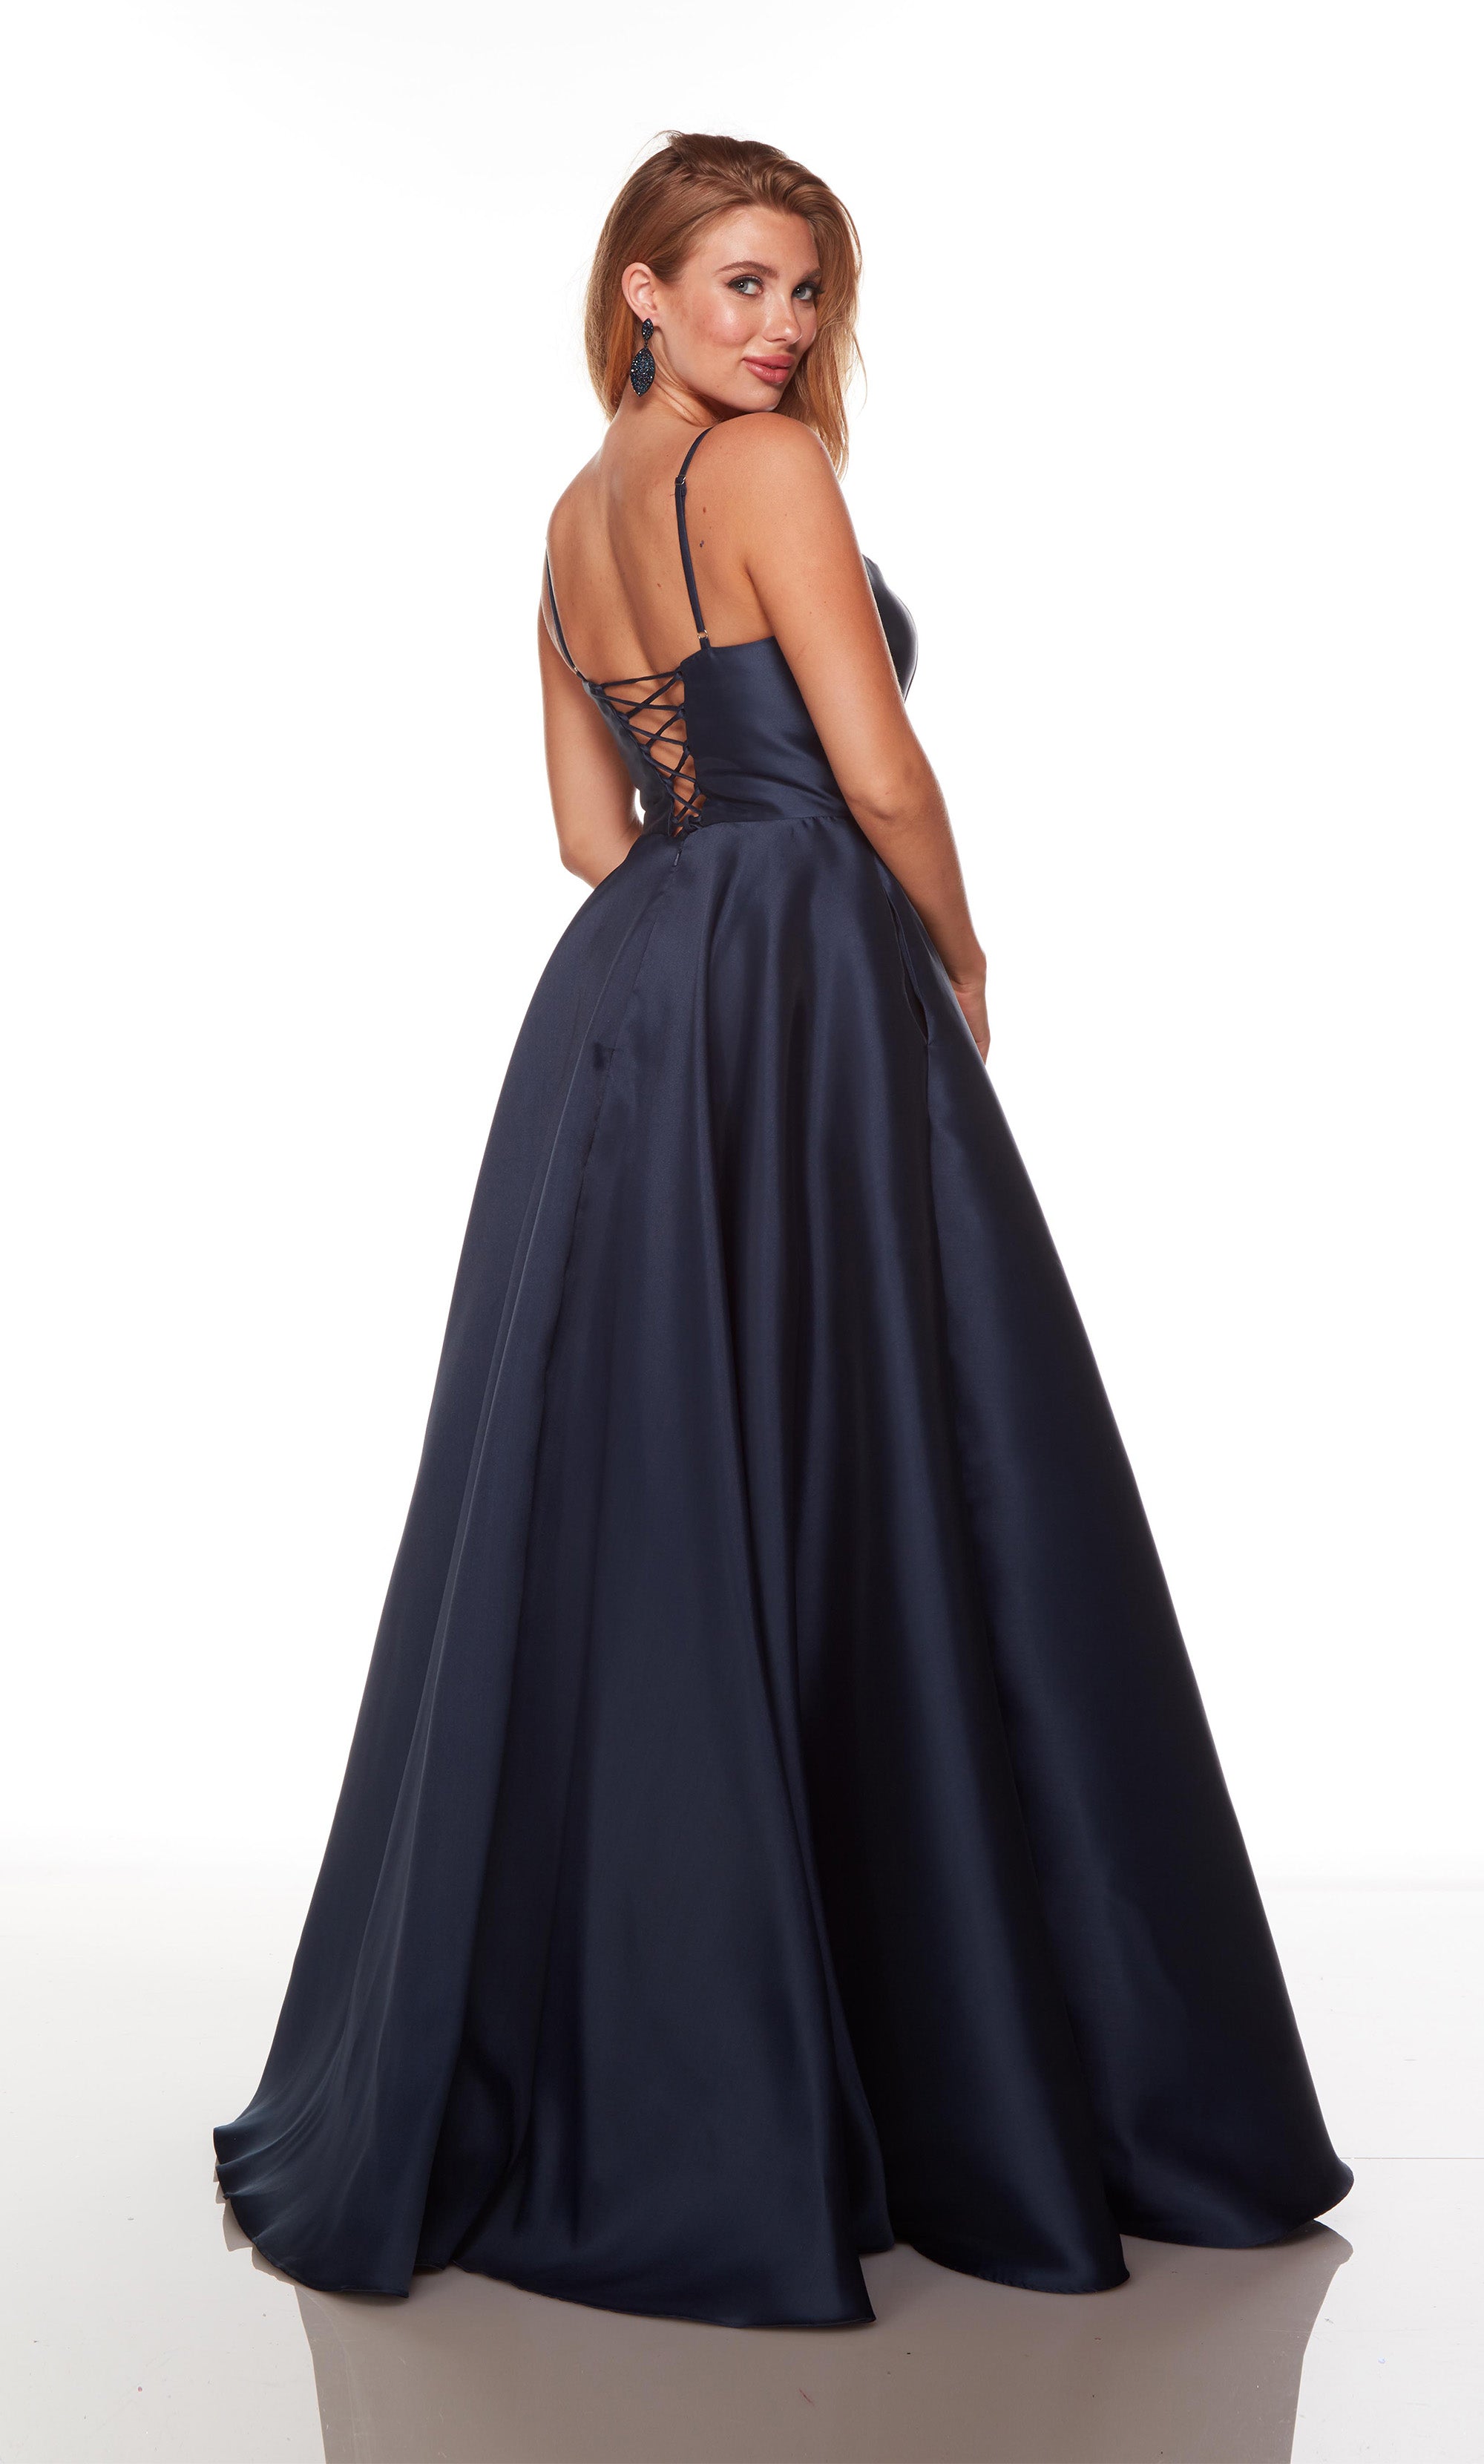 Winter formal dress with a scoop neck and pockets in the color midnight. COLOR-SWATCH_1755__MIDNIGHT